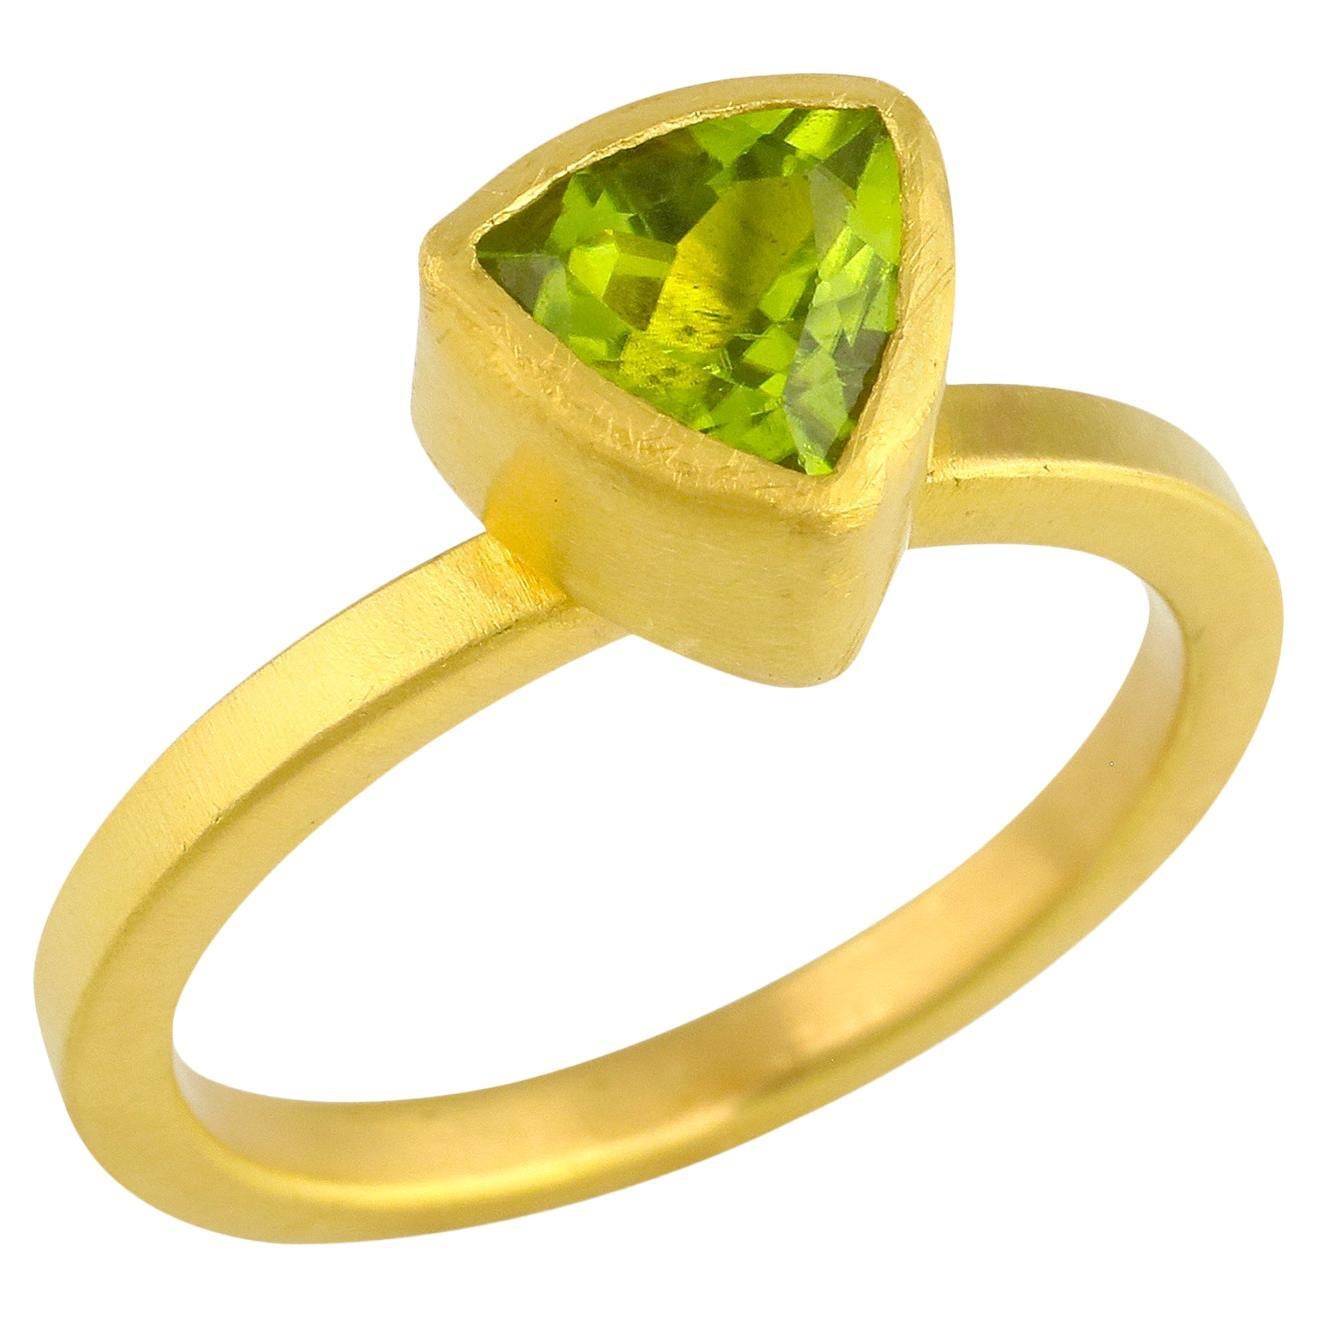 PHILIPPE SPENCER 1.4 Ct. Peridot in 22K and 20K Gold Solitaire Ring For Sale